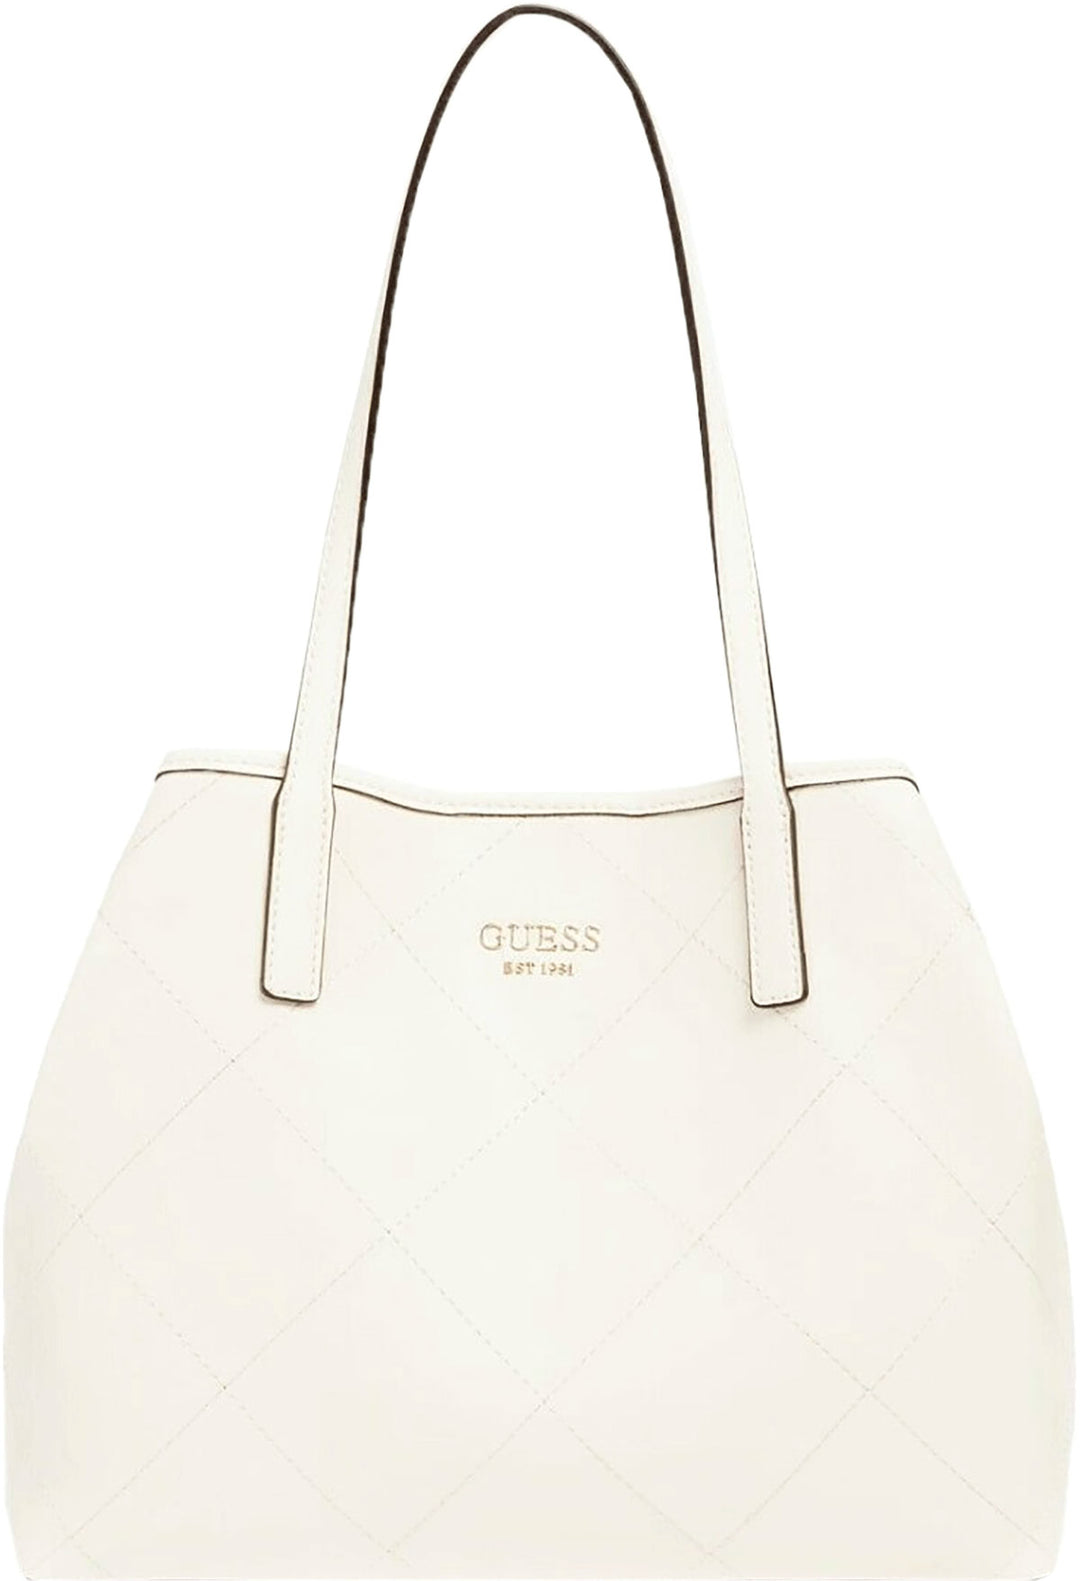 Guess Vikky Shopping Bag 2 in 1 In Cream For Women